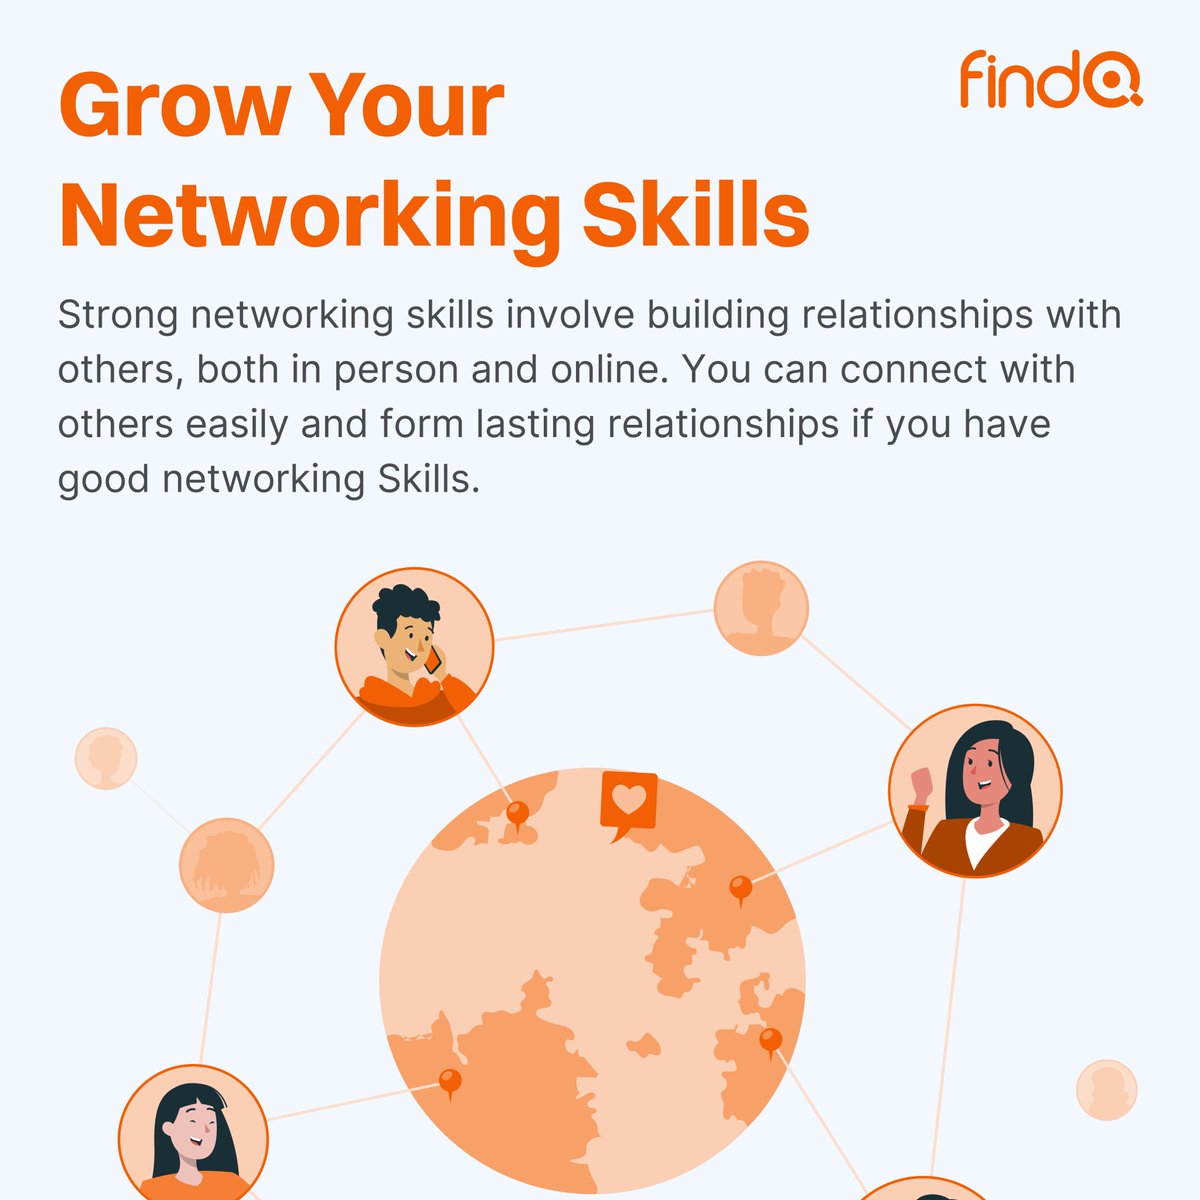 People network to help grow their personal and business relationships.

The team you build is the company you build

Networking will help every aspect of your professional career. 

#findq #networking #career #recruitment #jobconsultancy
#QueueYourRecruitmentWithUs